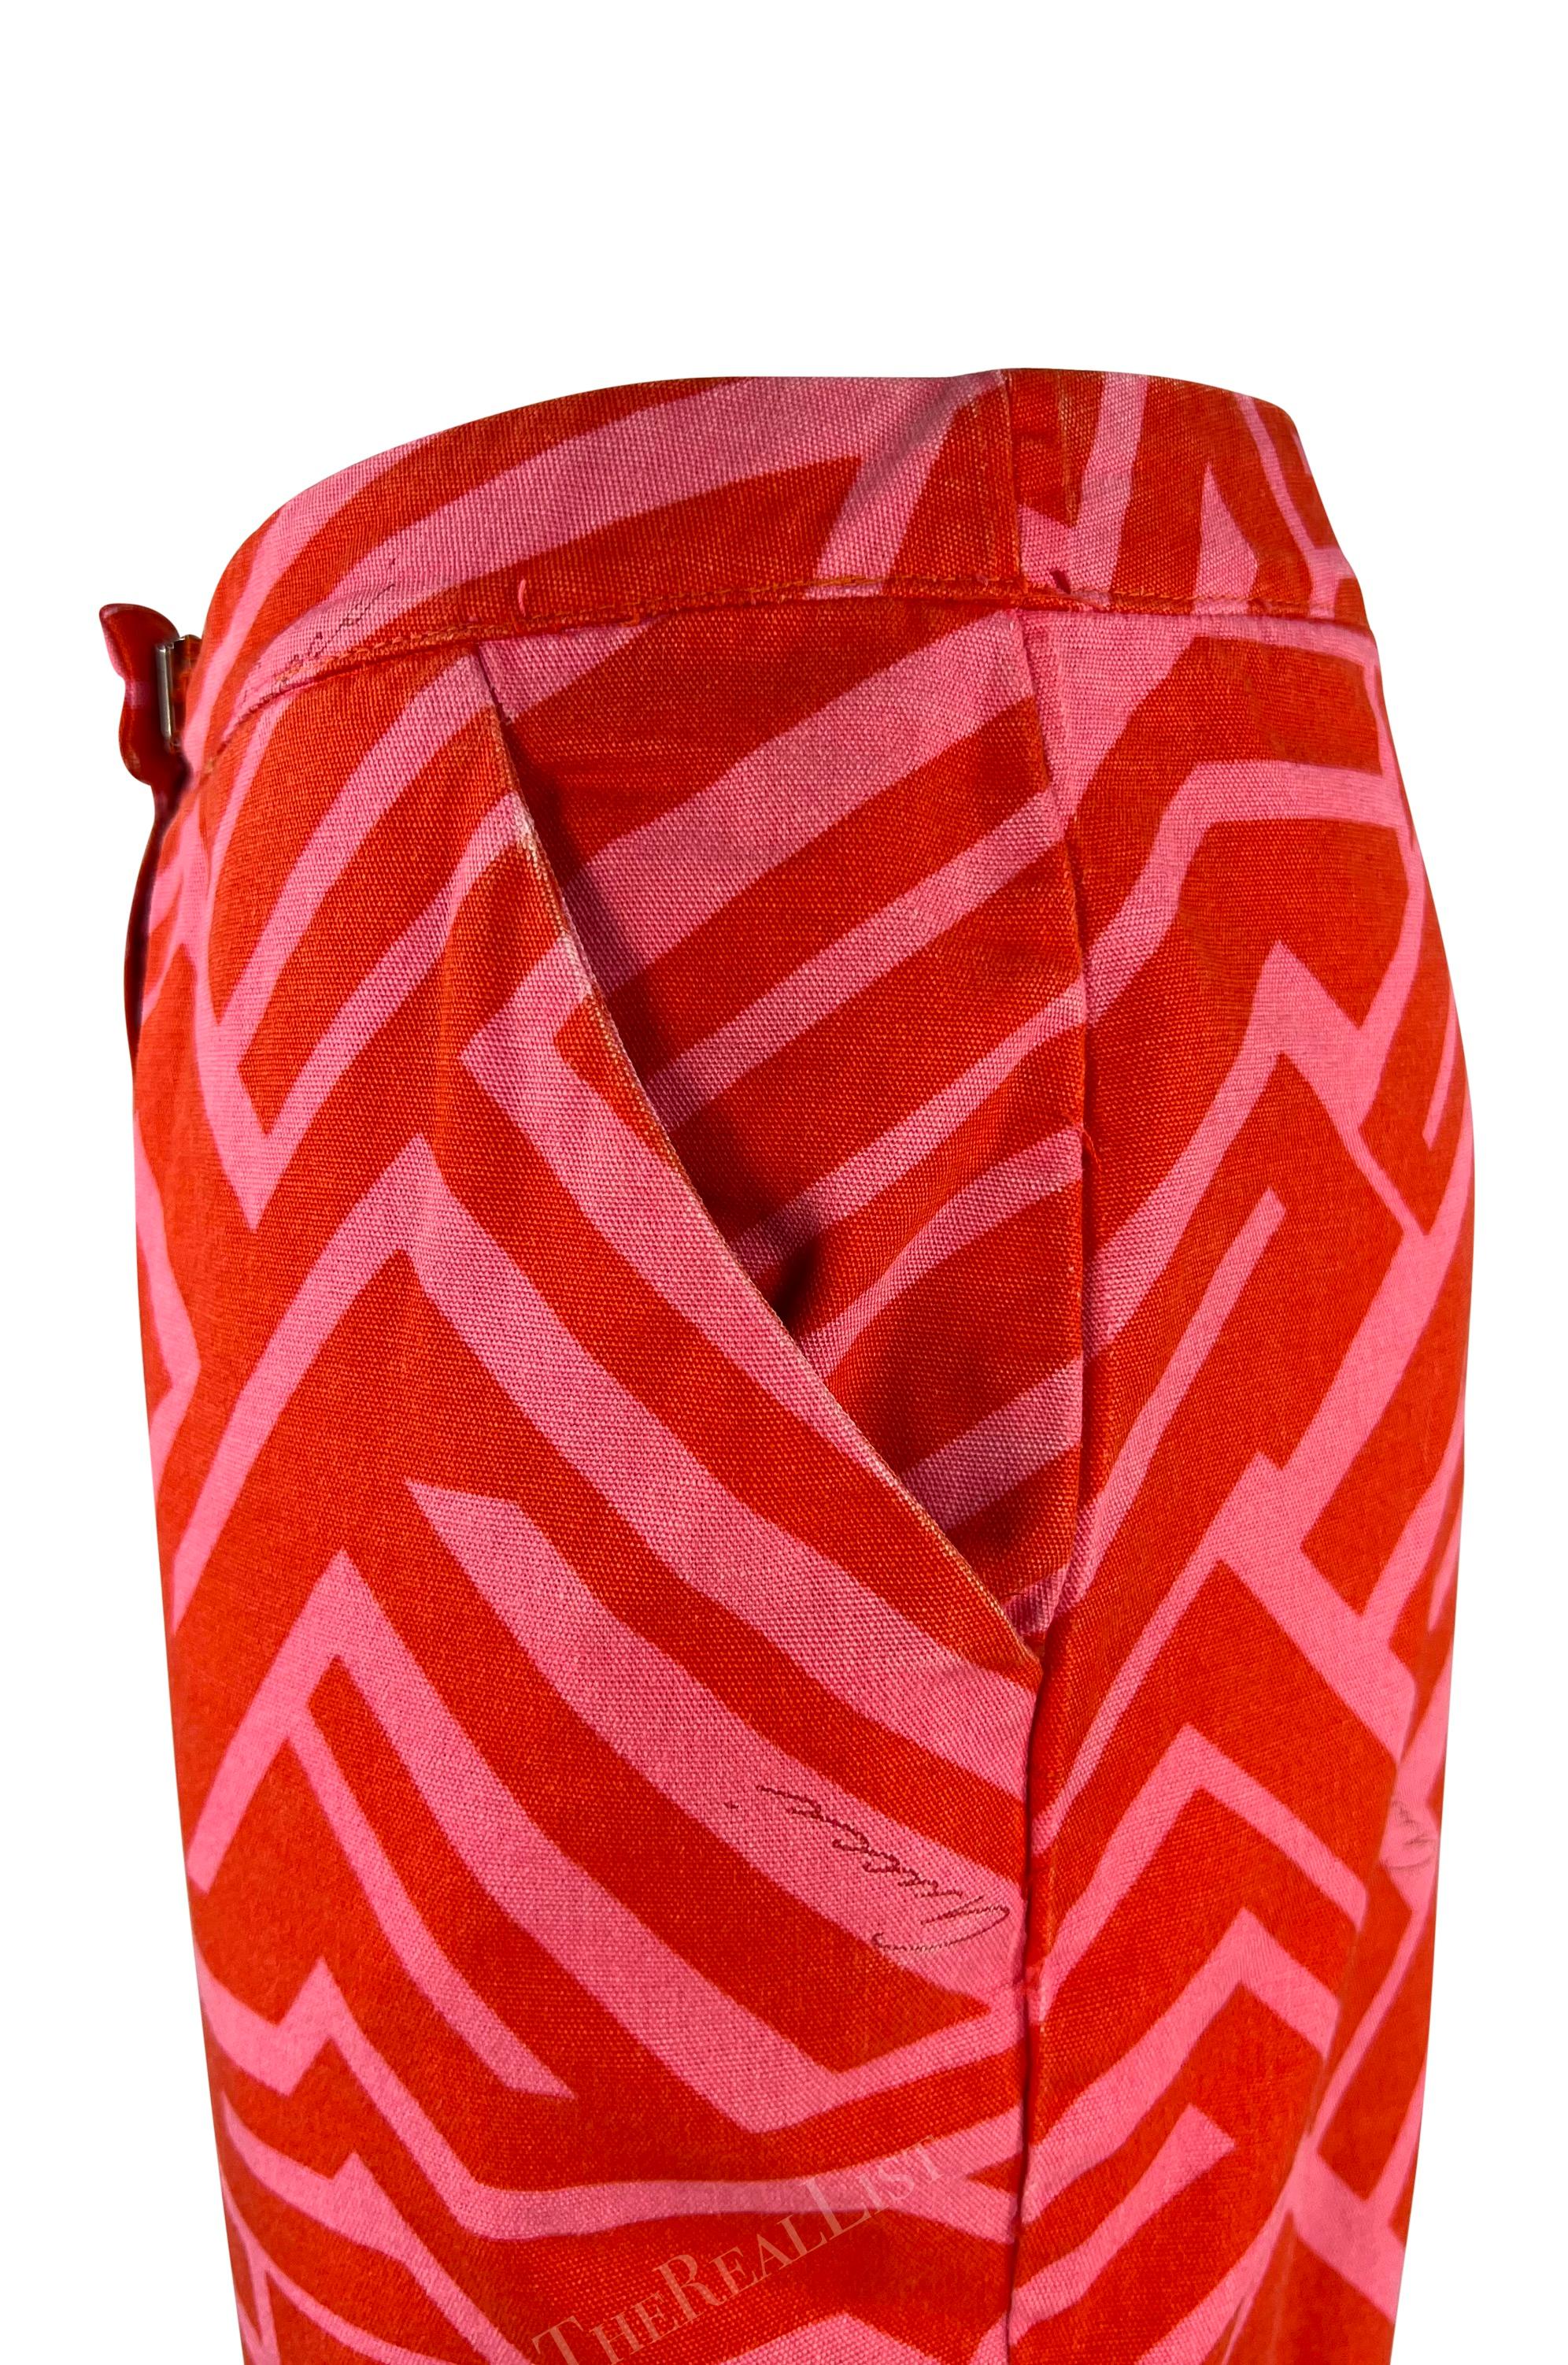 S/S 1996 Gucci by Tom Ford Pink Red Geometric Logo Print Cotton Pants For Sale 6